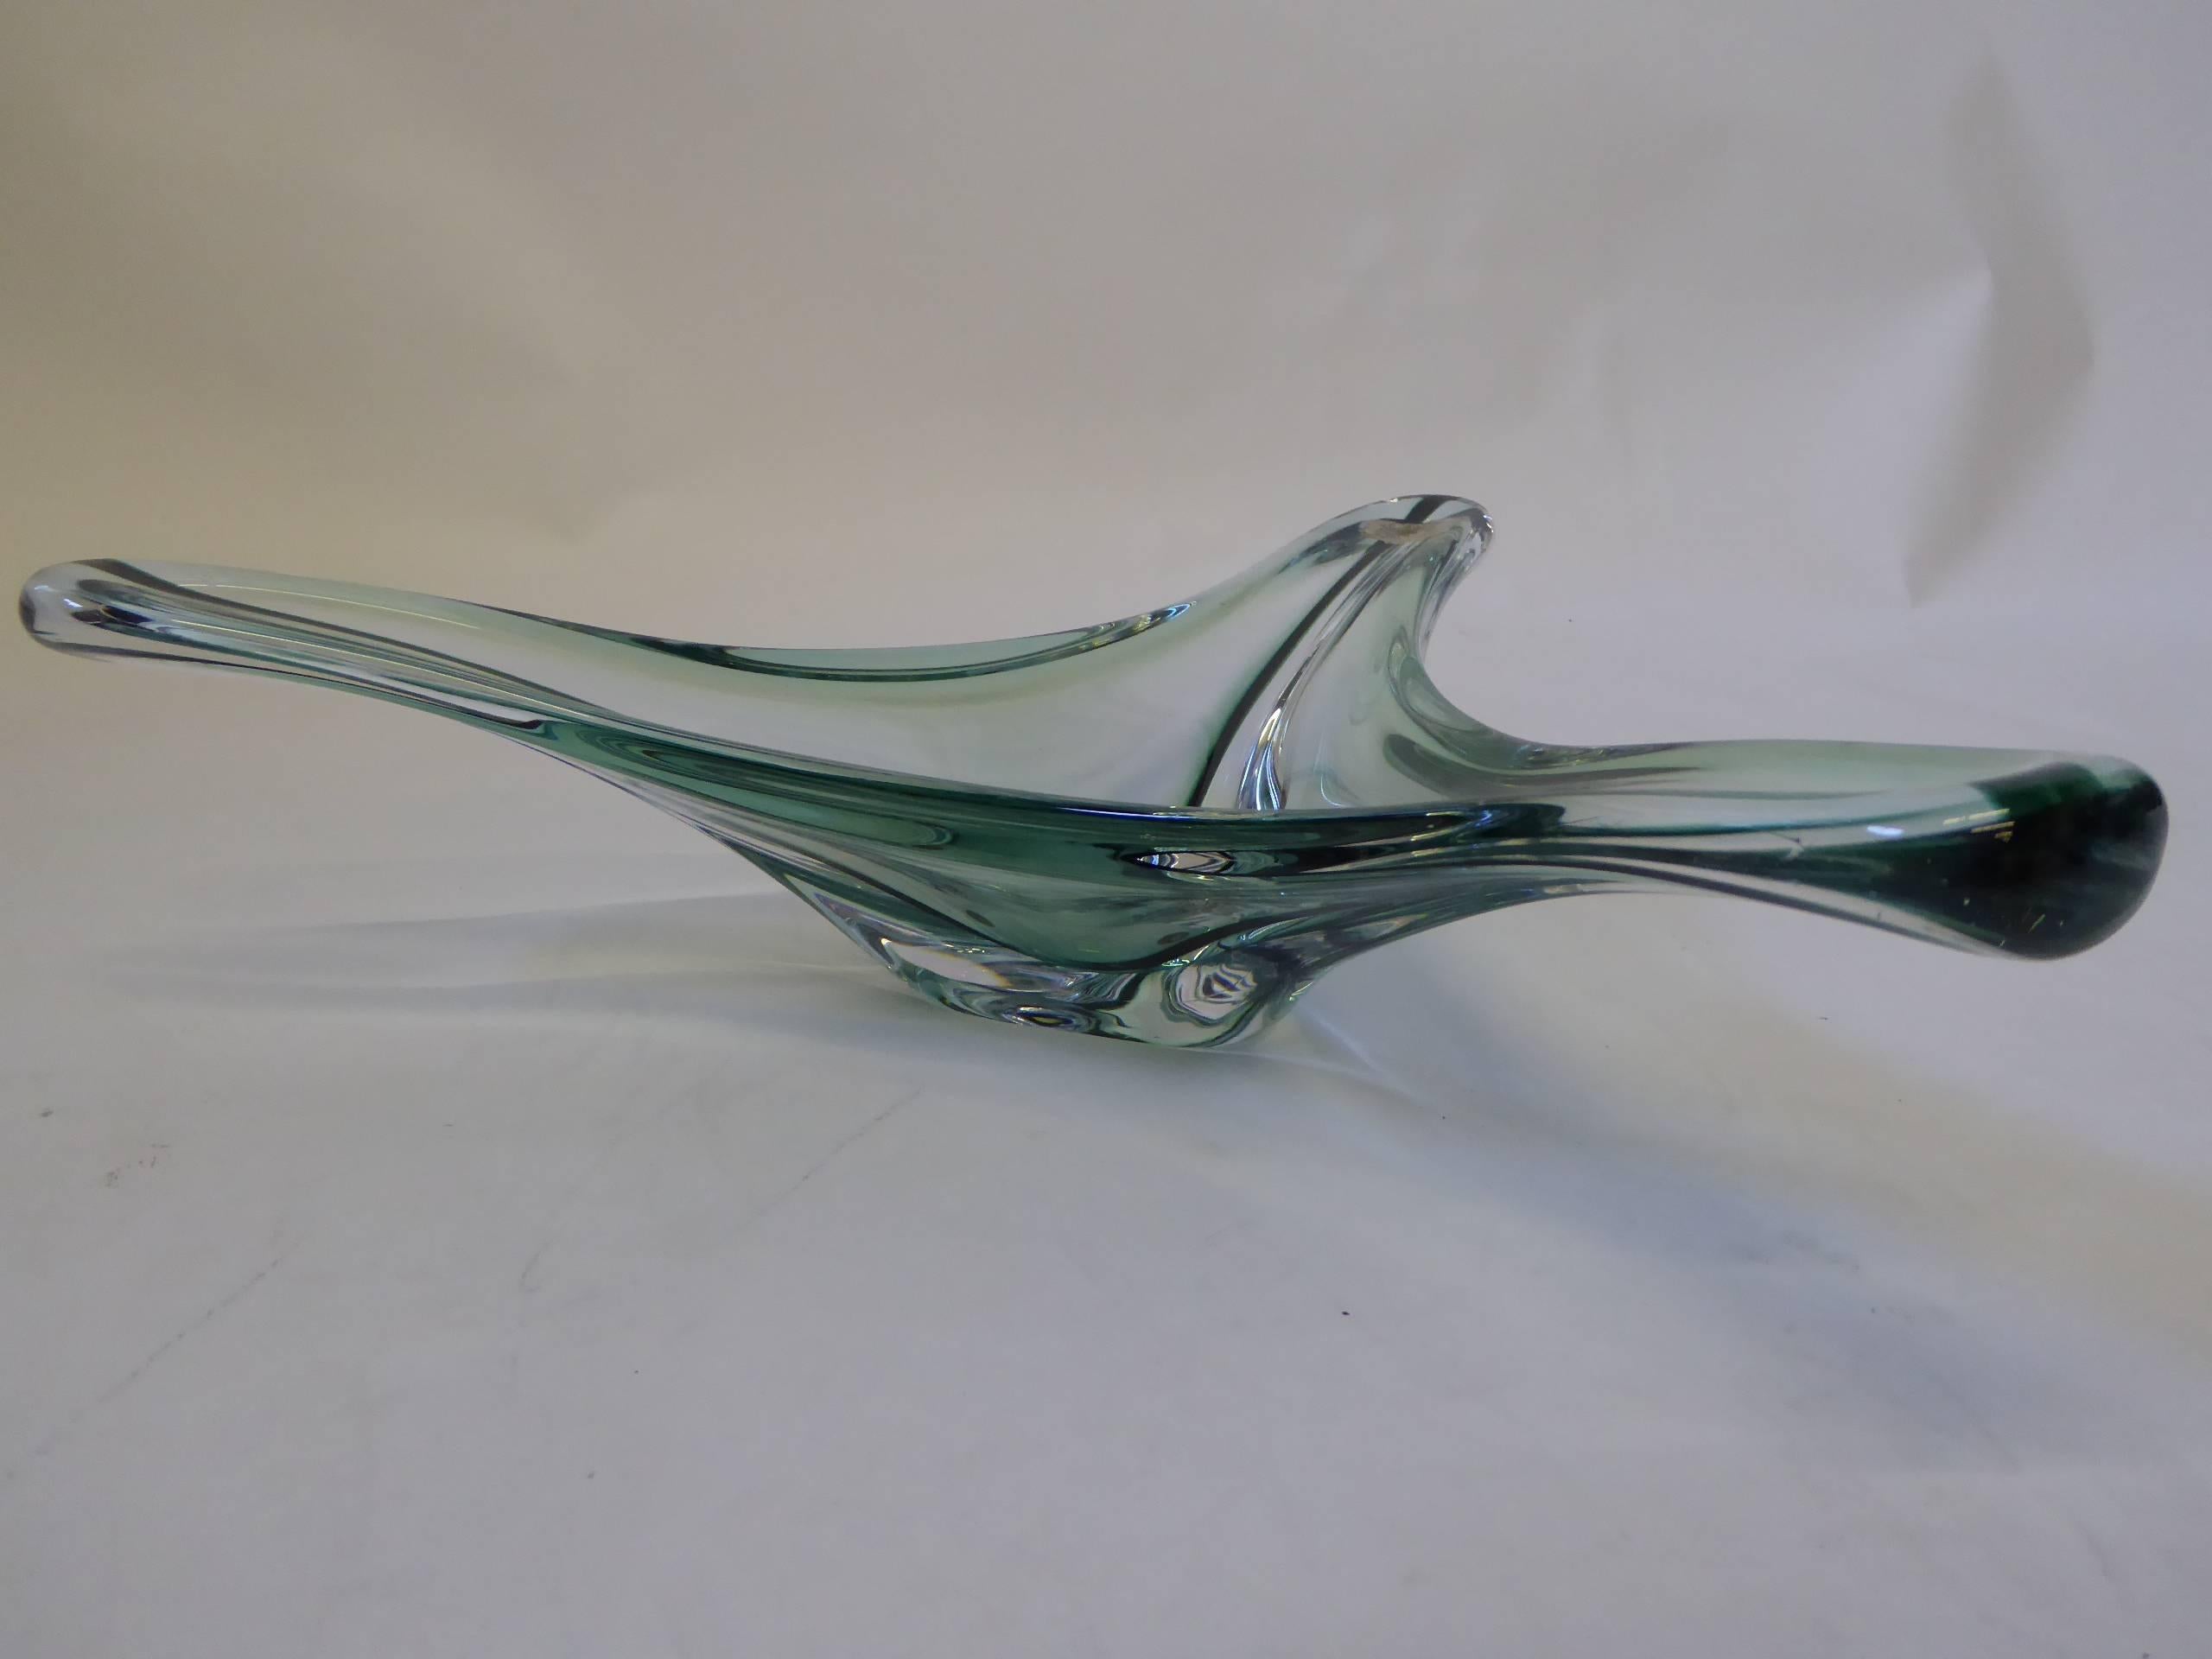 Mesmerizing, modern and surreal Mid-Century form from Val St. Lambert, Belgium's foremost glass studio. This large bowl with a radiating stylized trefoil design has an inner deep green band of color pulled to the outer arms with an overall hint of